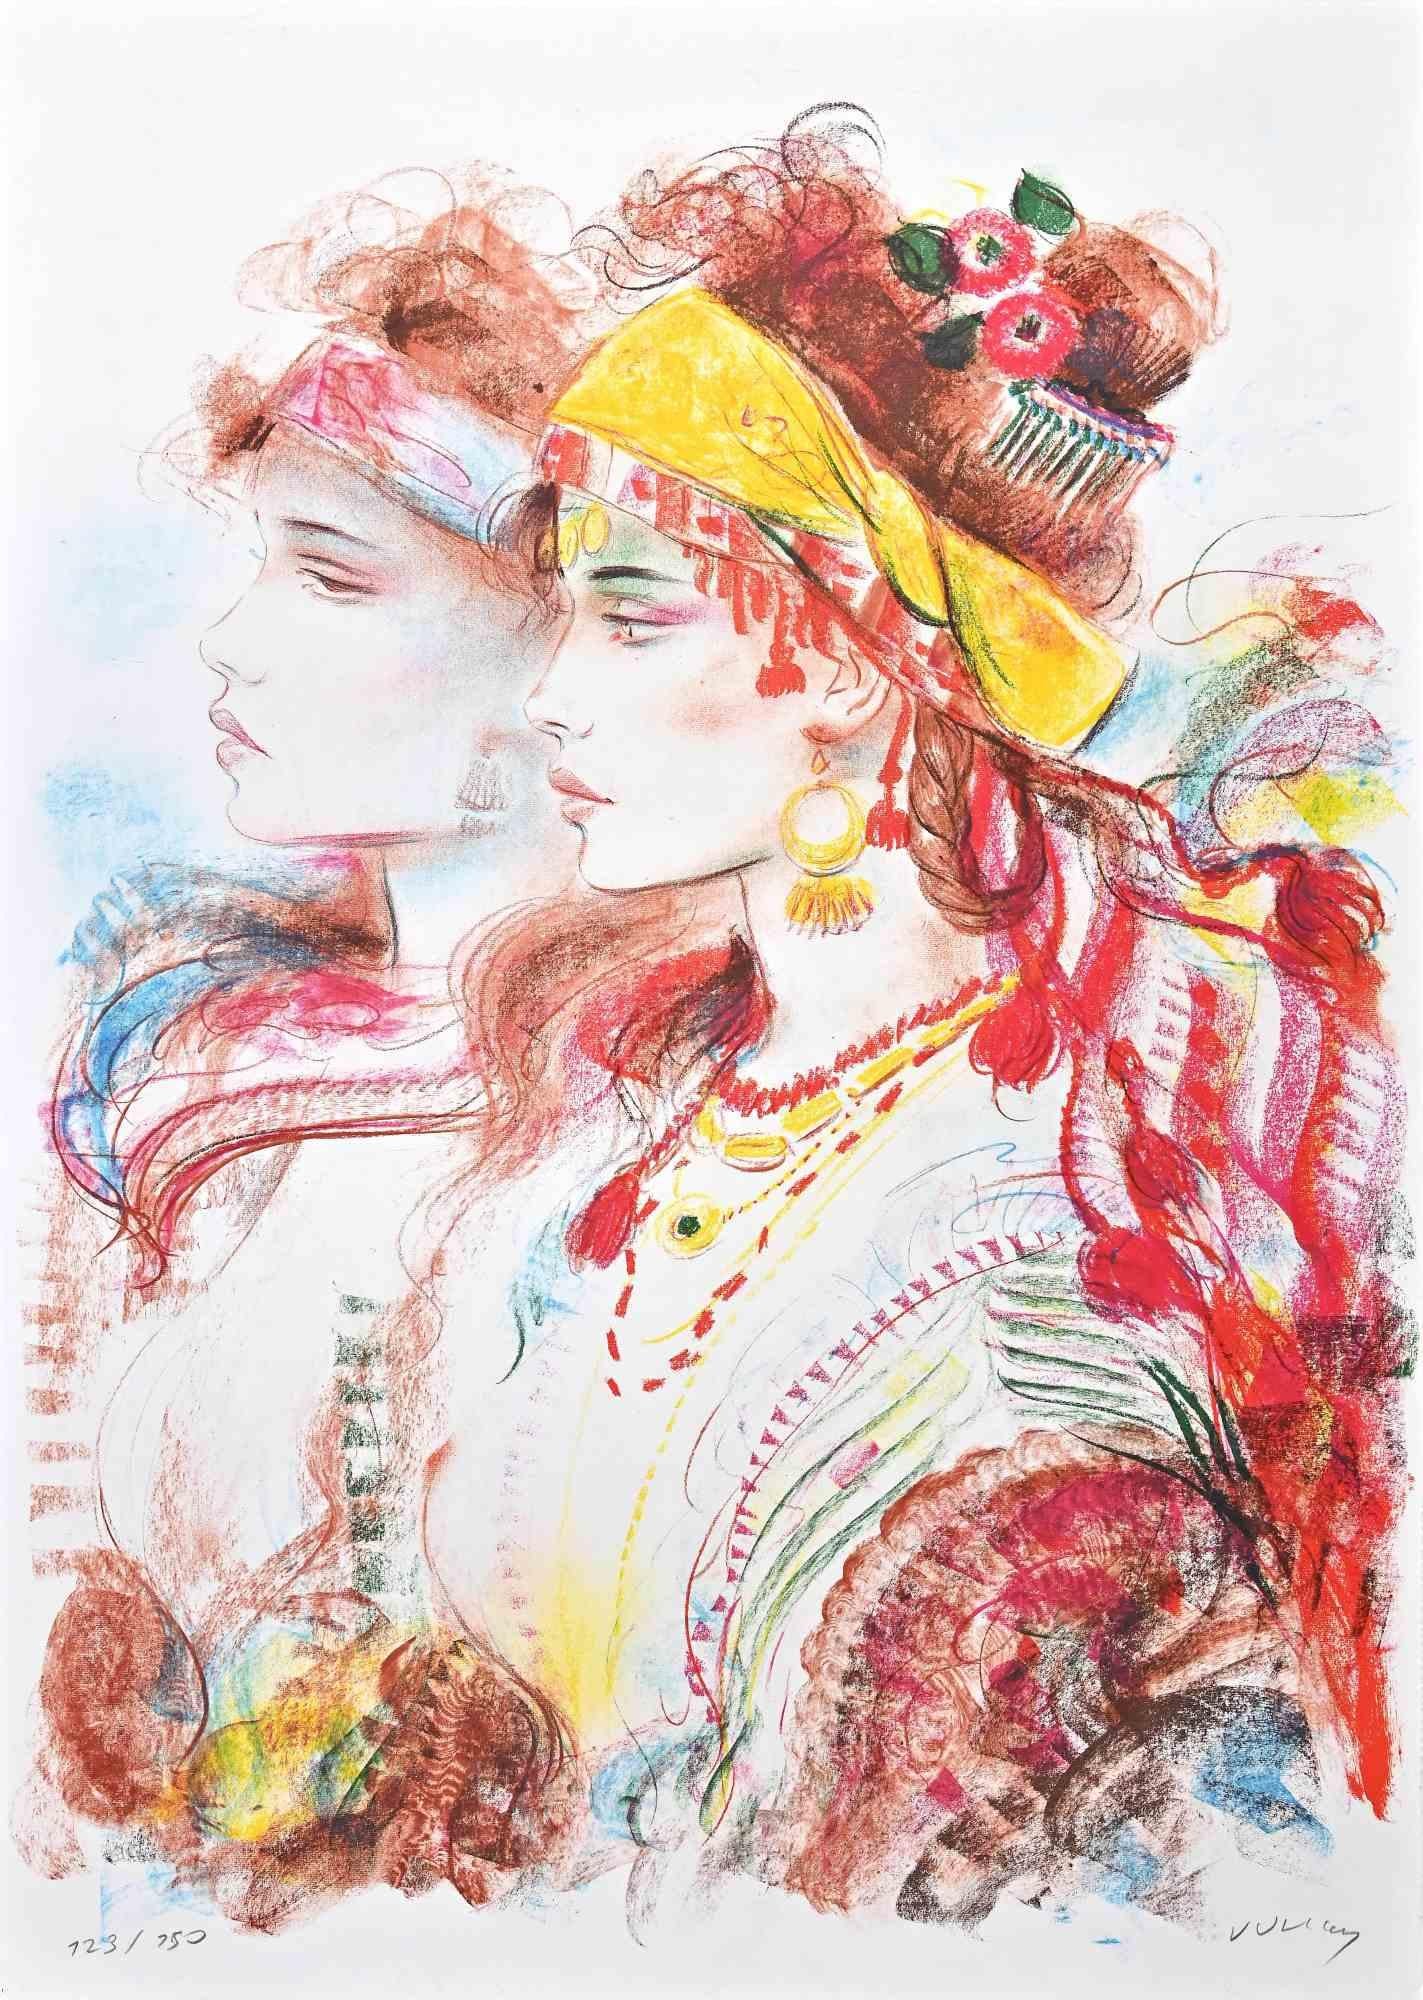 Two Gypsies - Lithograph by Jovan Vulic - 1980s